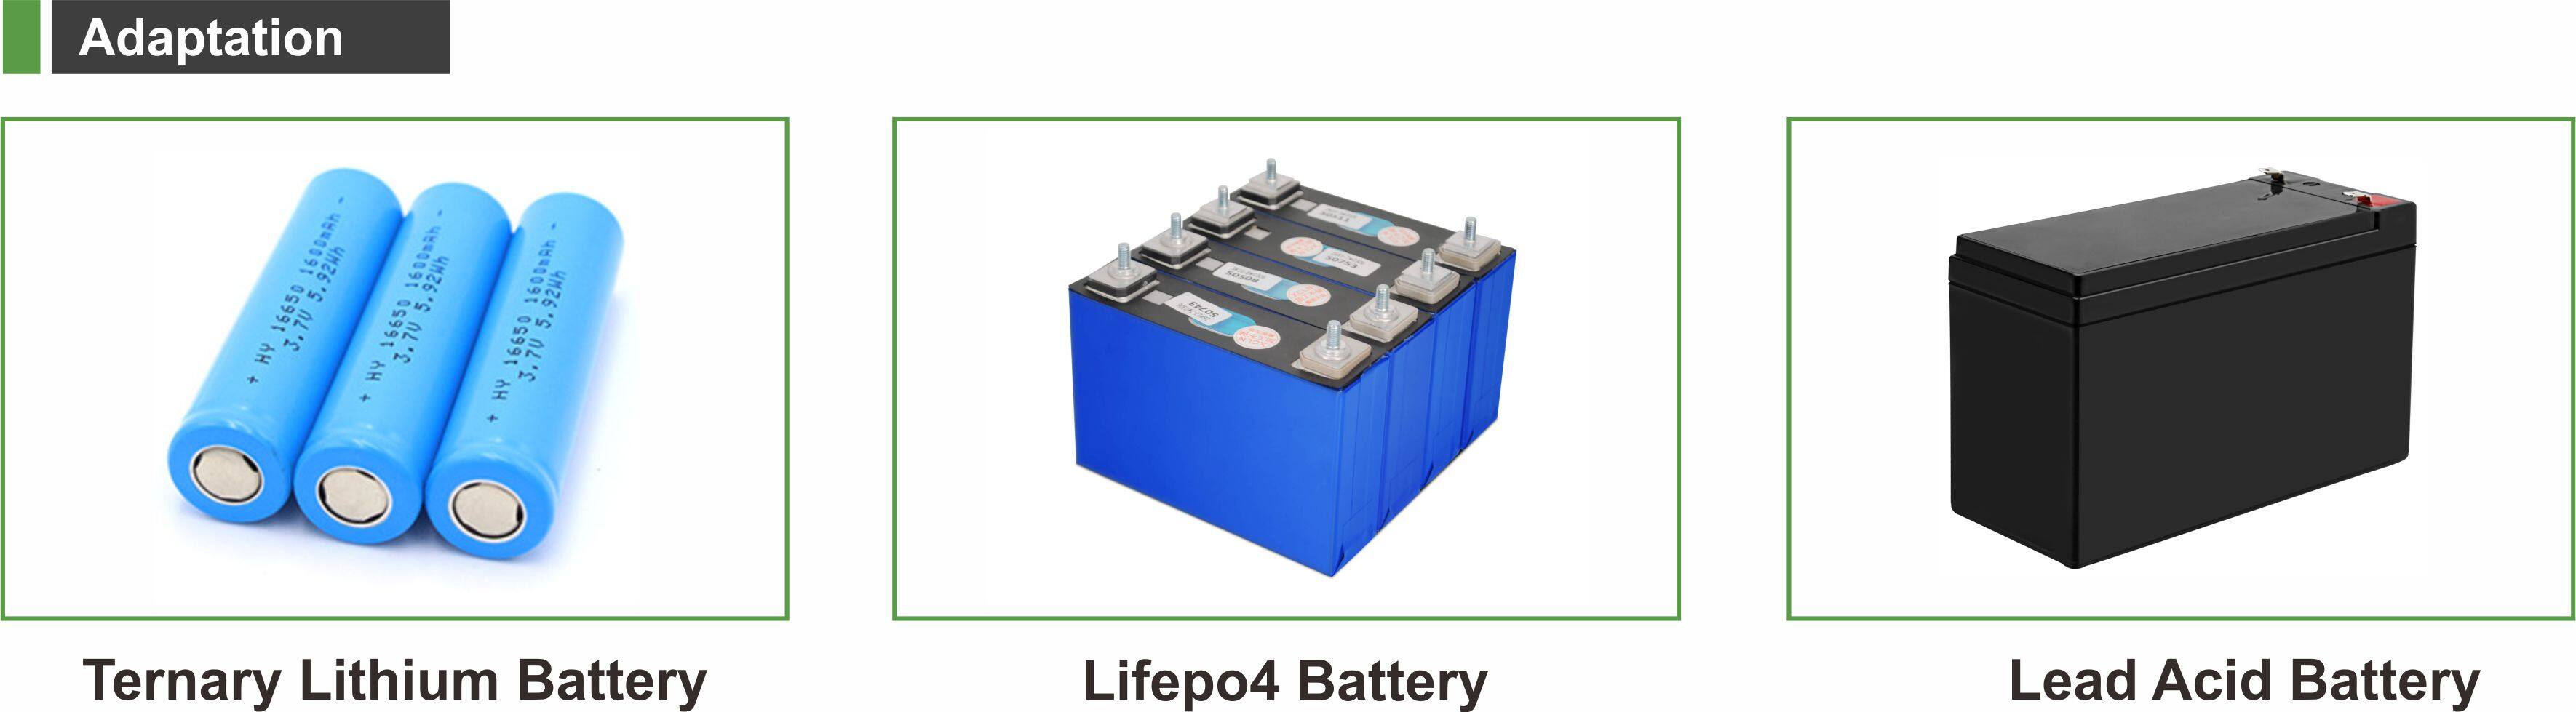 charger for lithium batteries